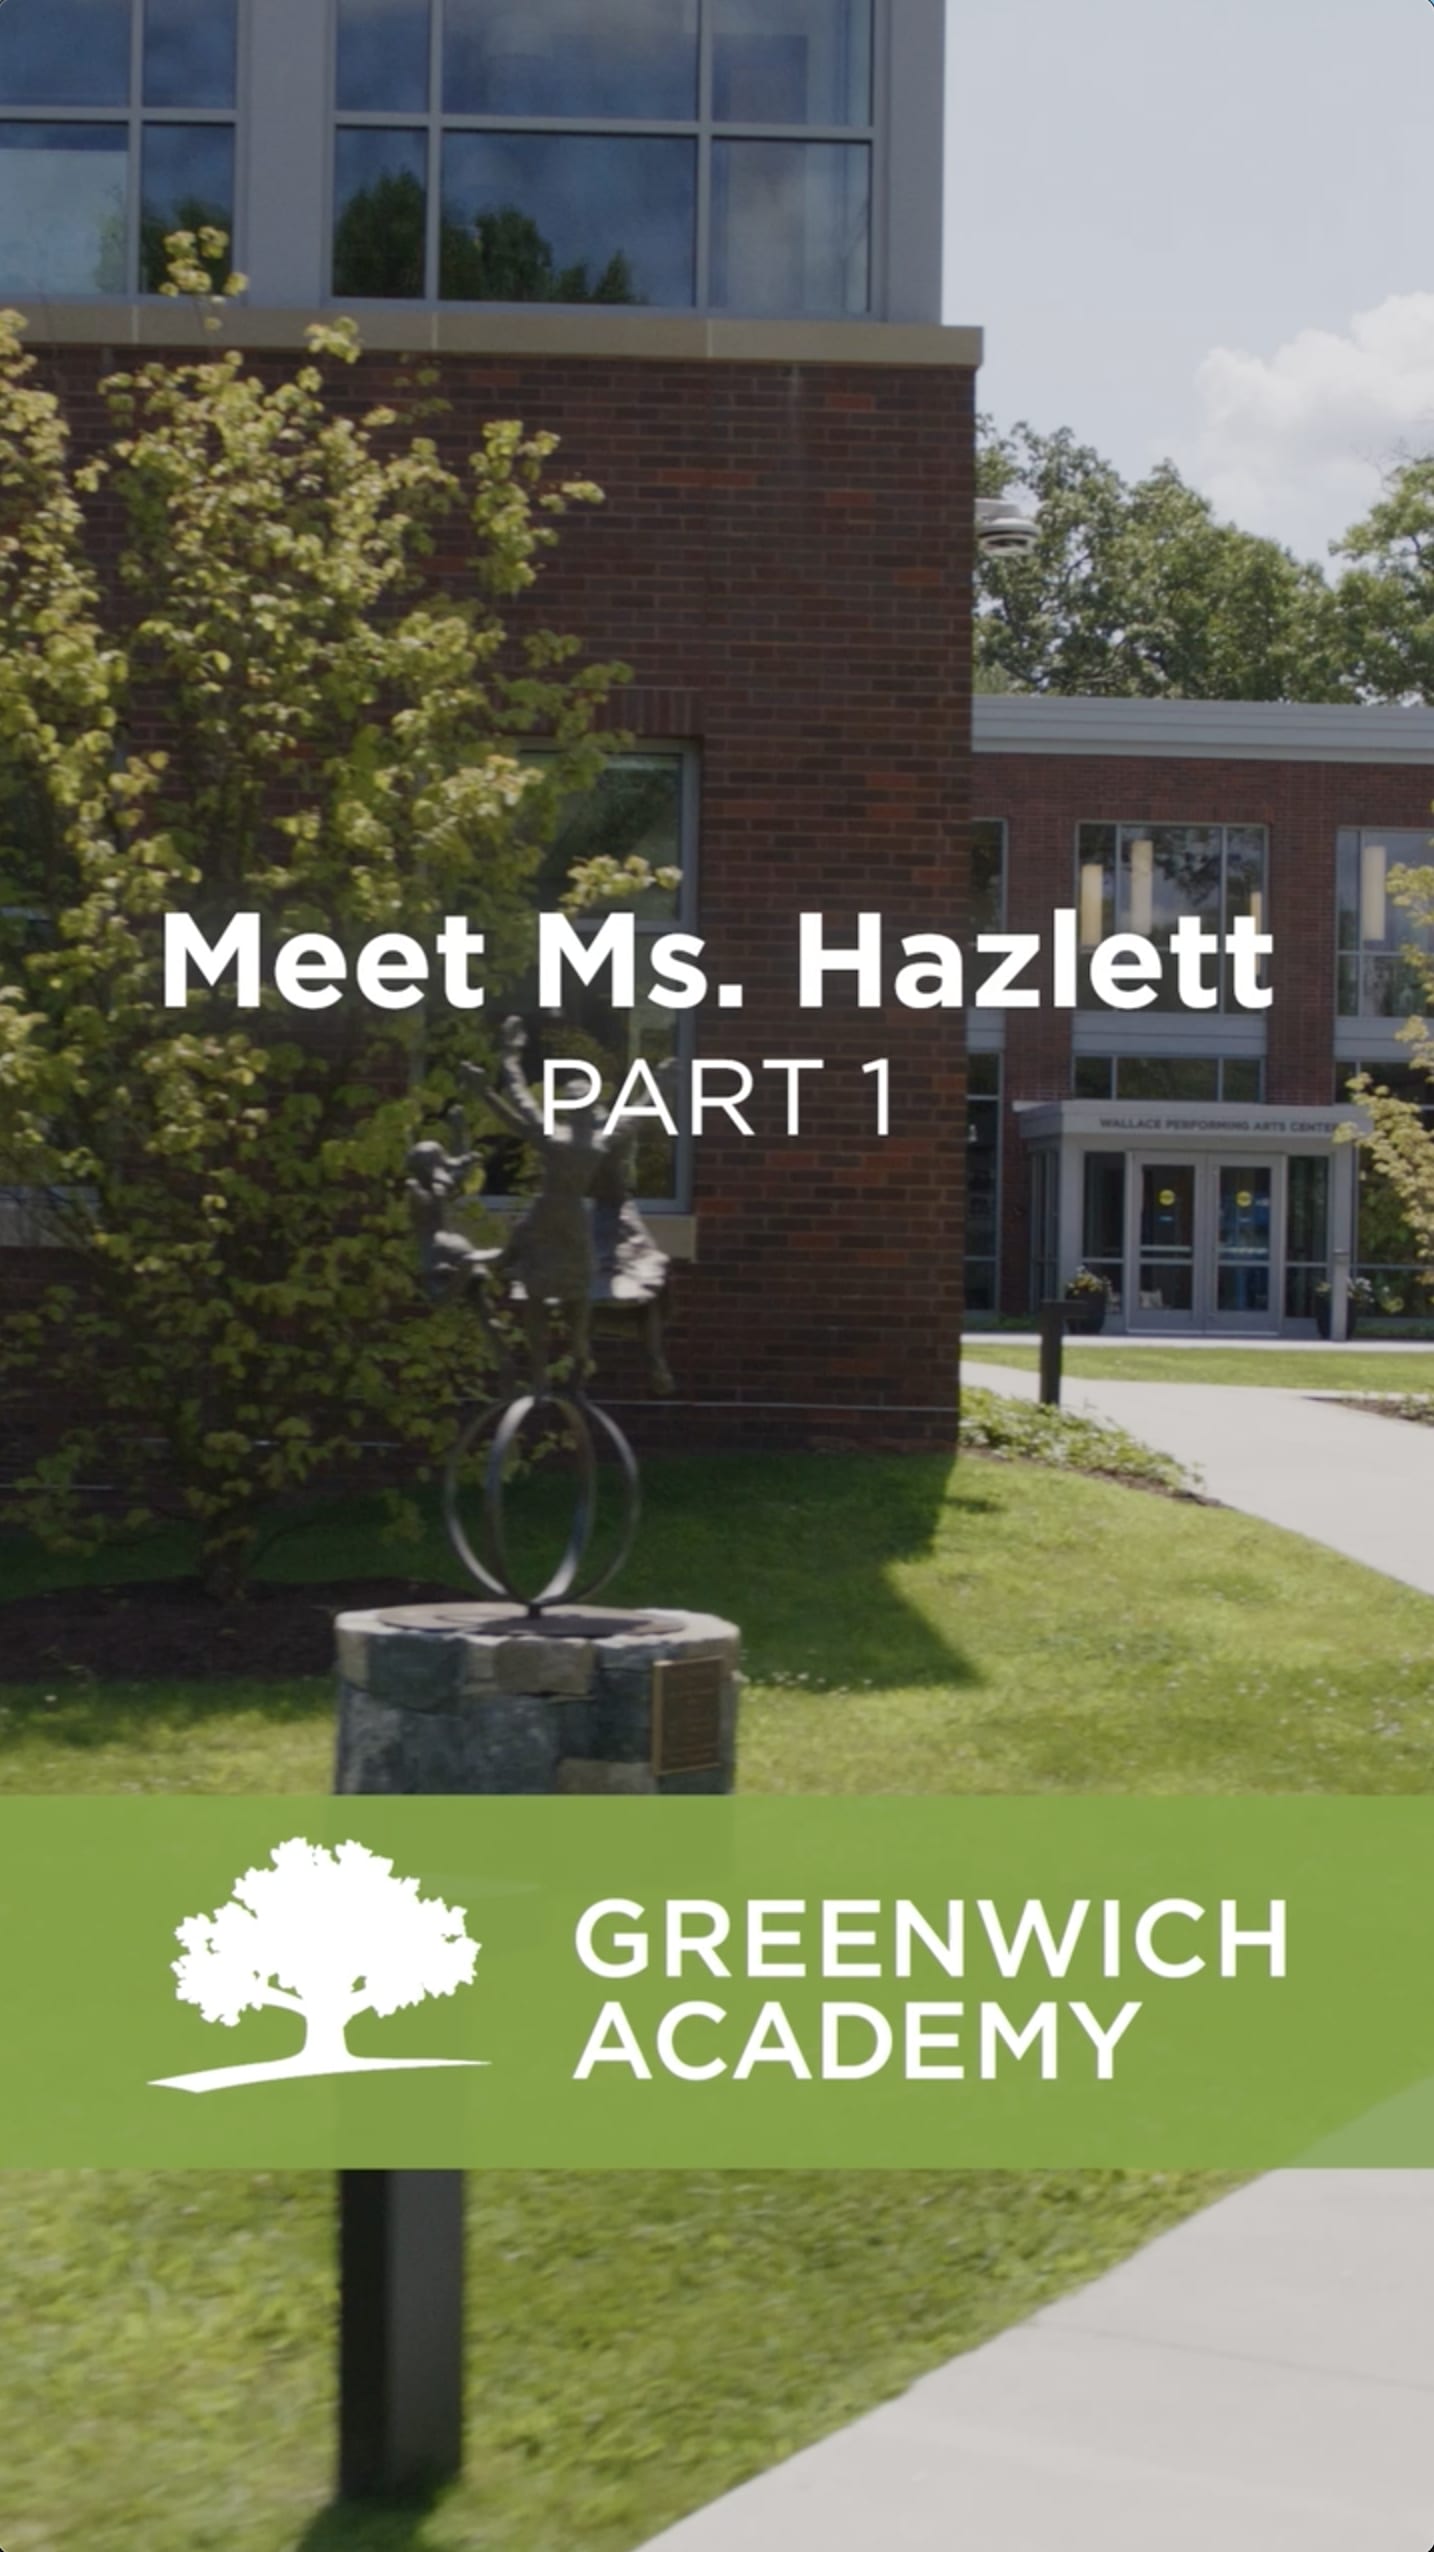 About Greenwich Academy, Private School For Girls